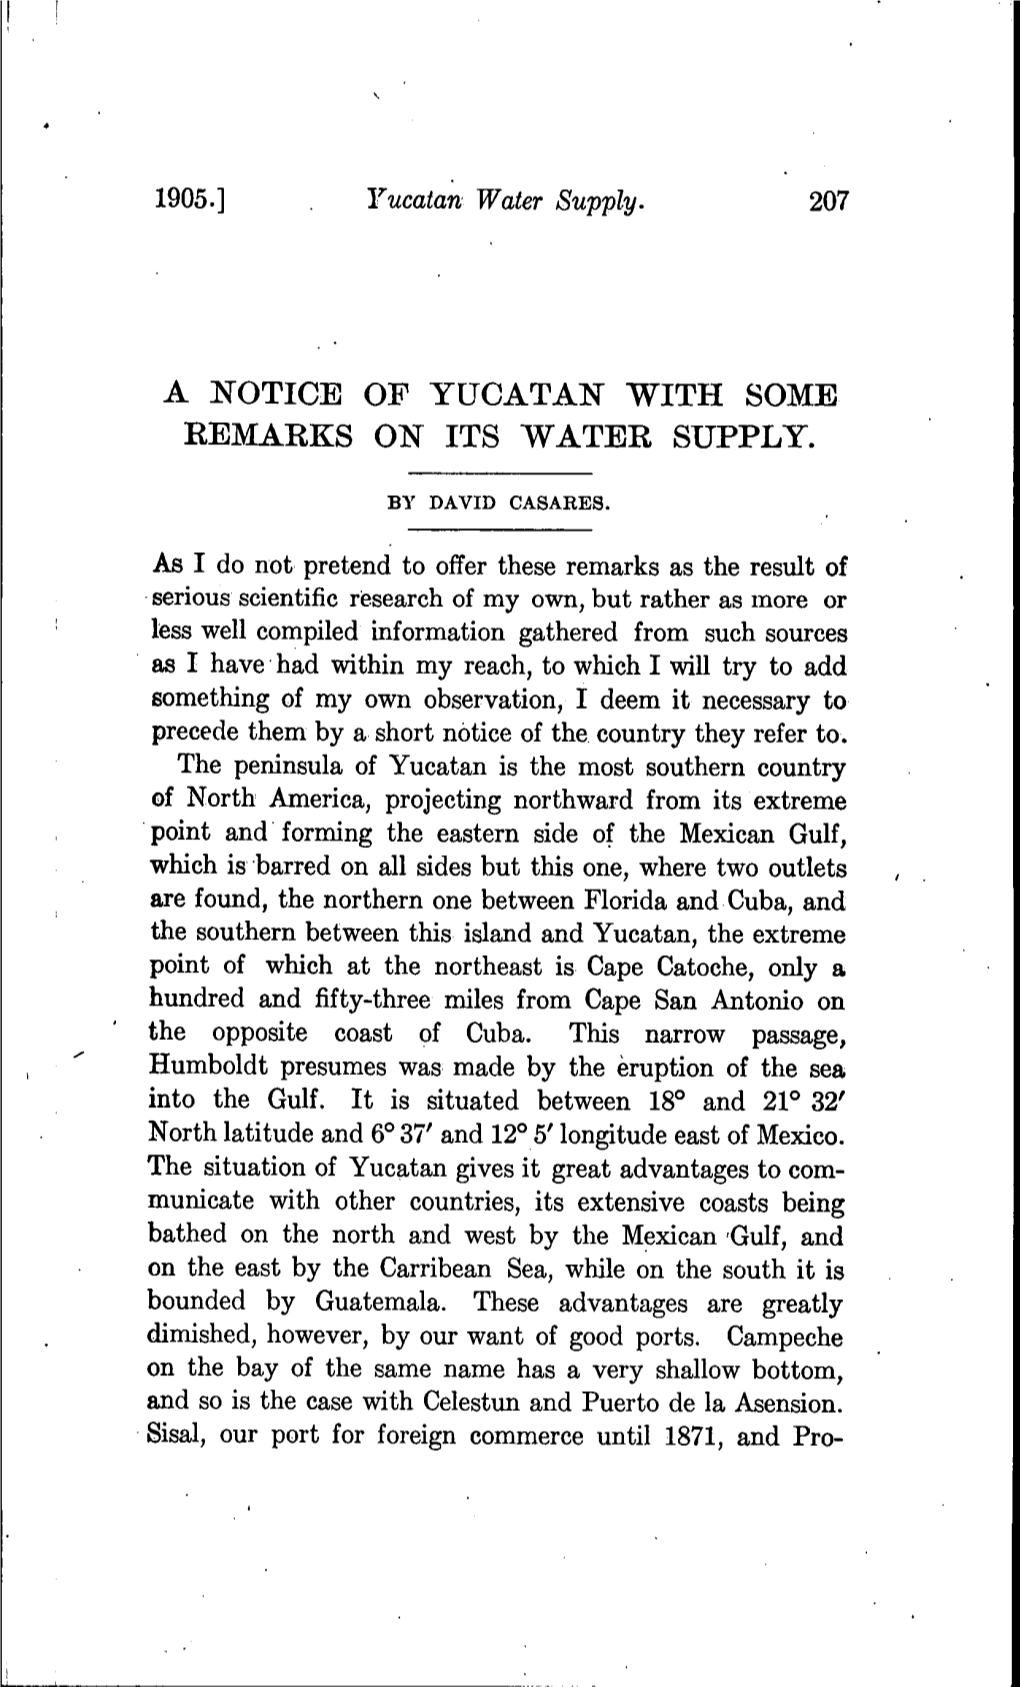 A Notice of Yucatan with Some Remarks on Its Water Supply